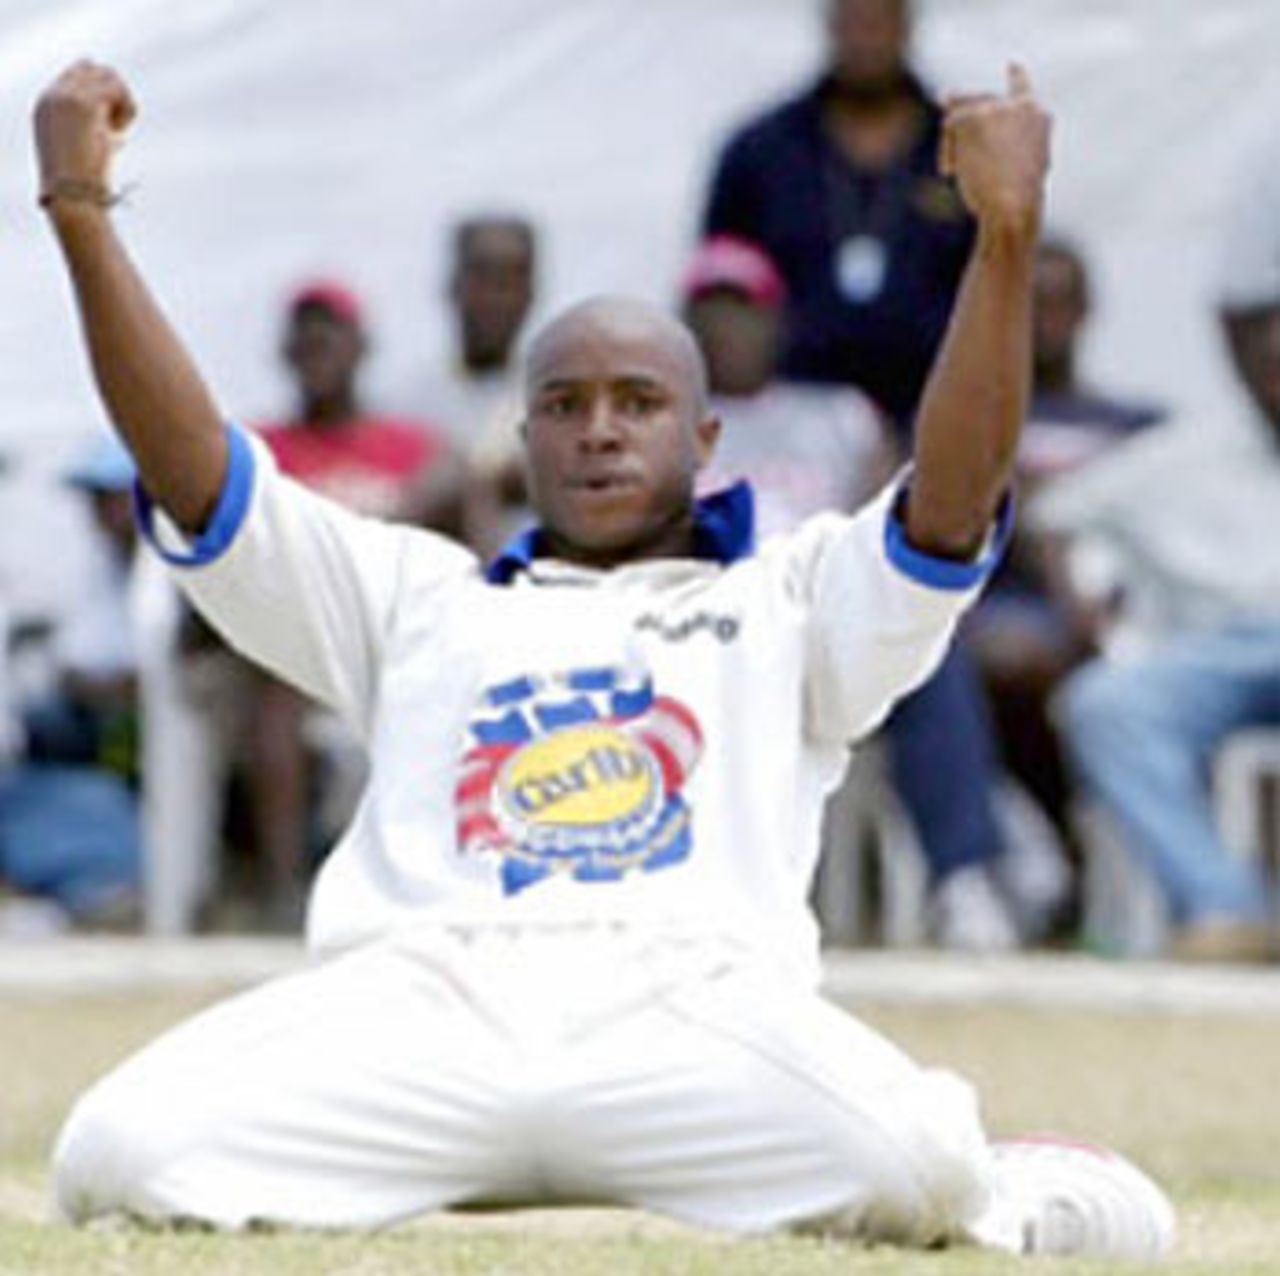 Tino Best celebrates another wicket as Barbados sealed the regional title, Guyana v Barbados, Guyana, February 7, 2007